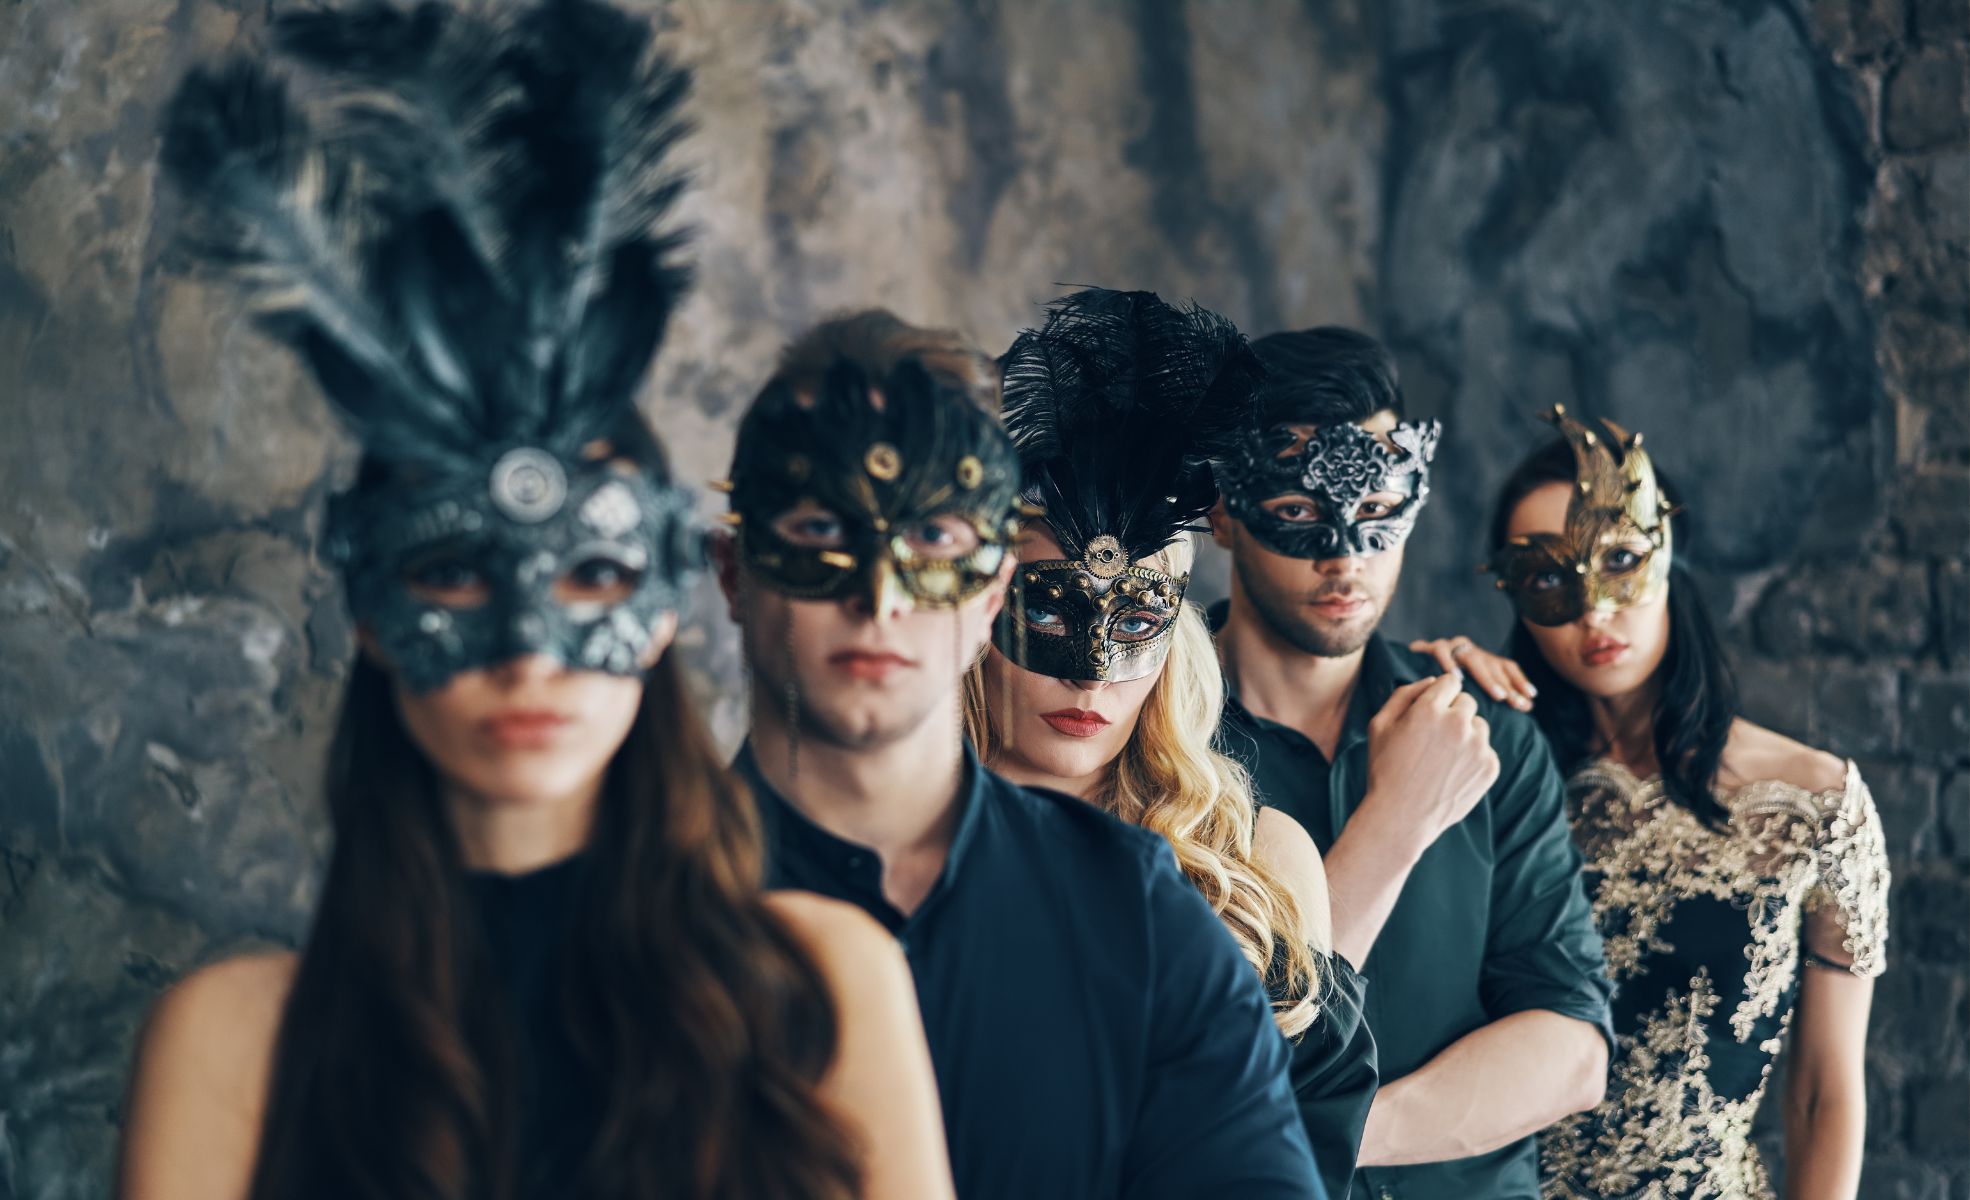 Teenagers Dressed In Formal Masks For Masquerade-Themed Photoshoot